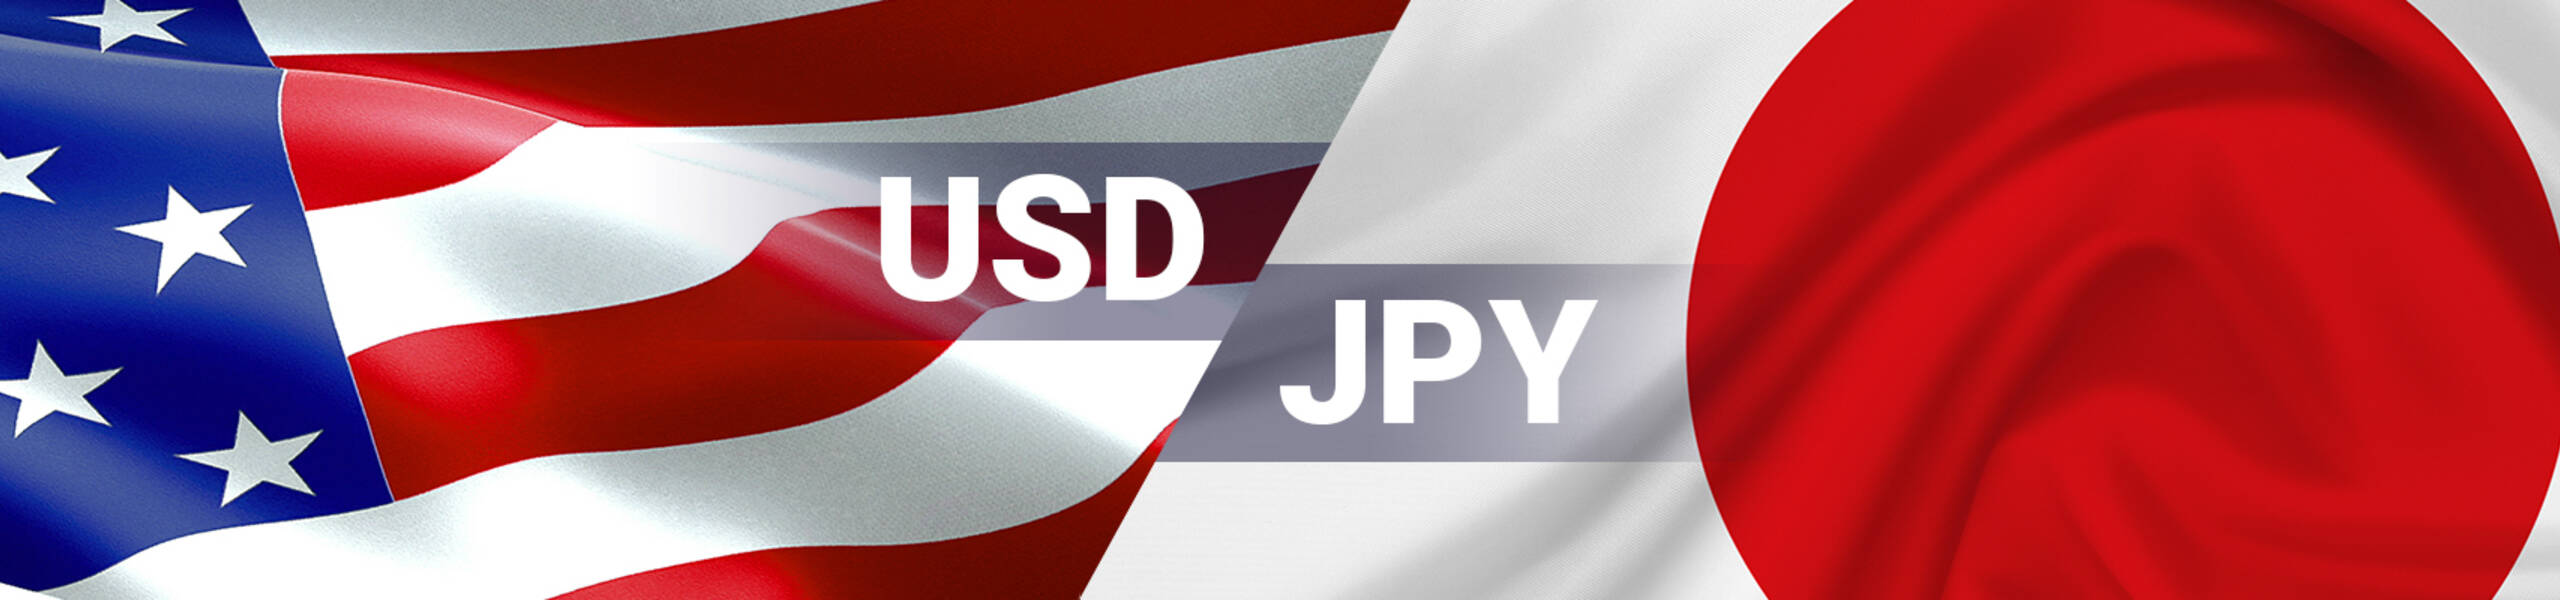 USD/JPY Dailyレポート 2018/02/02